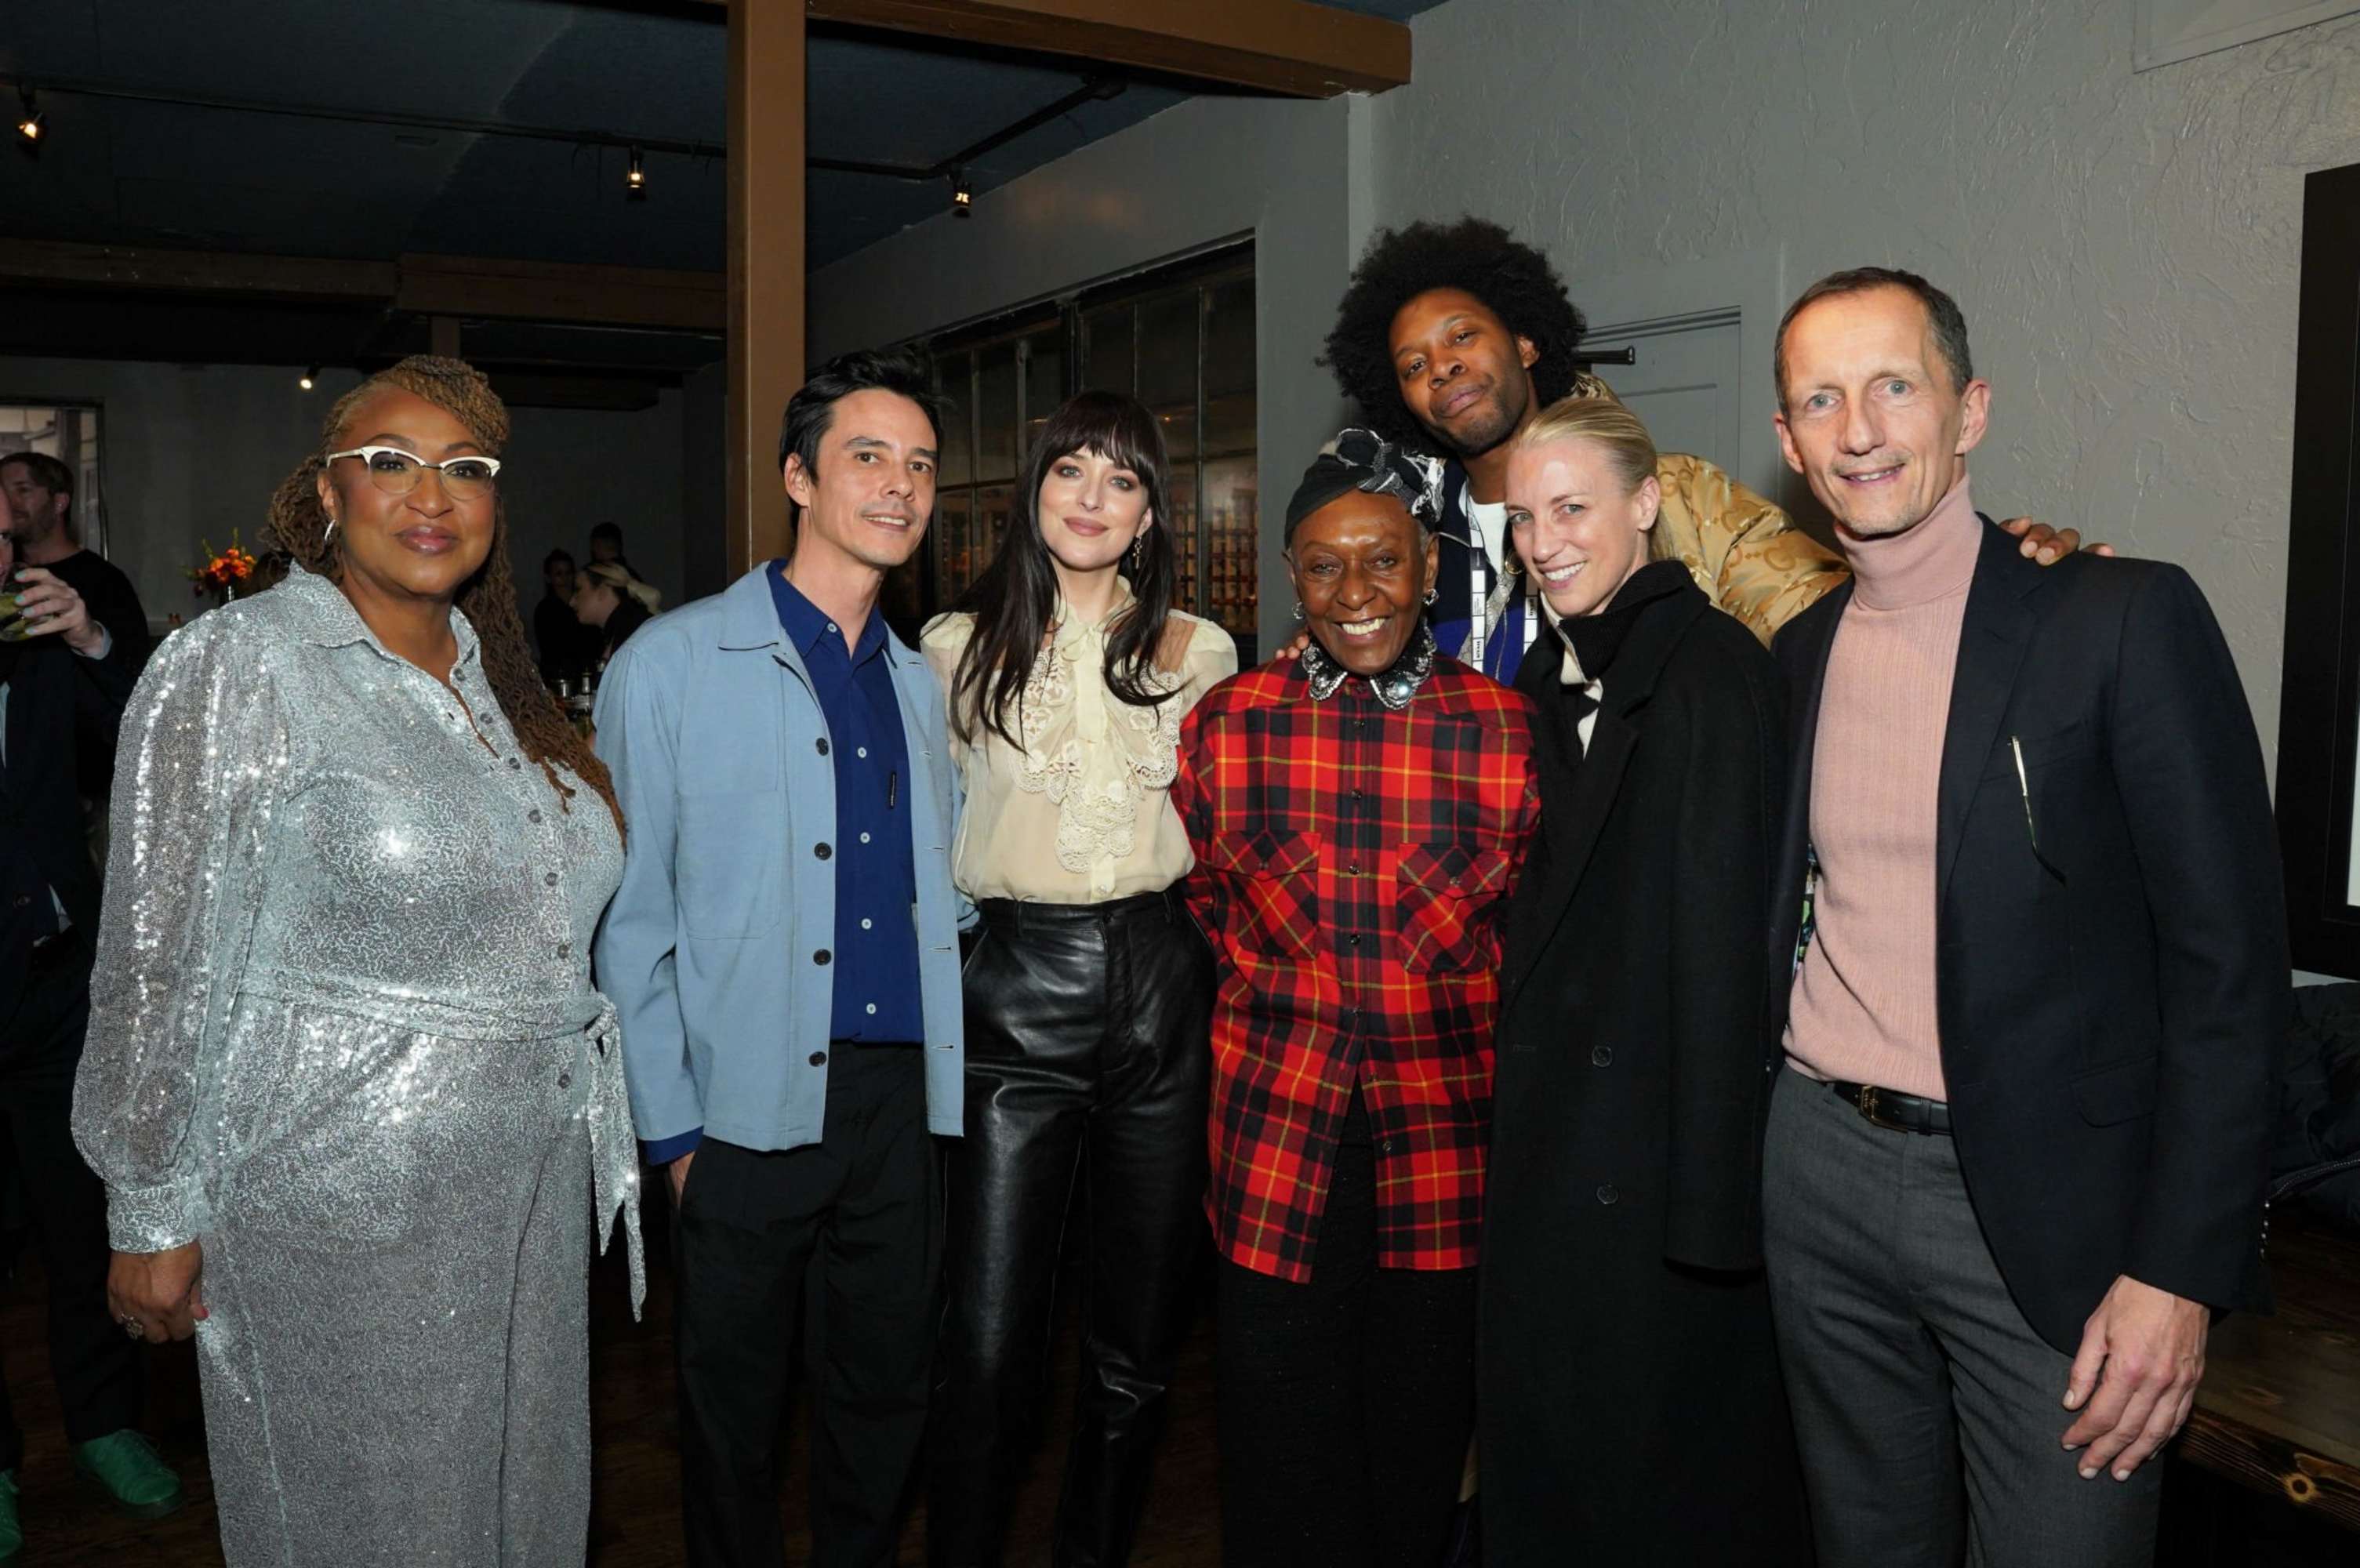 Gucci_Celebrates_the_Premiere_of_Bethann_Hardison___Frederic_Tcheng_s_Invisible_Beauty_at_the_Sundance_Film_Festival_28629.jpg